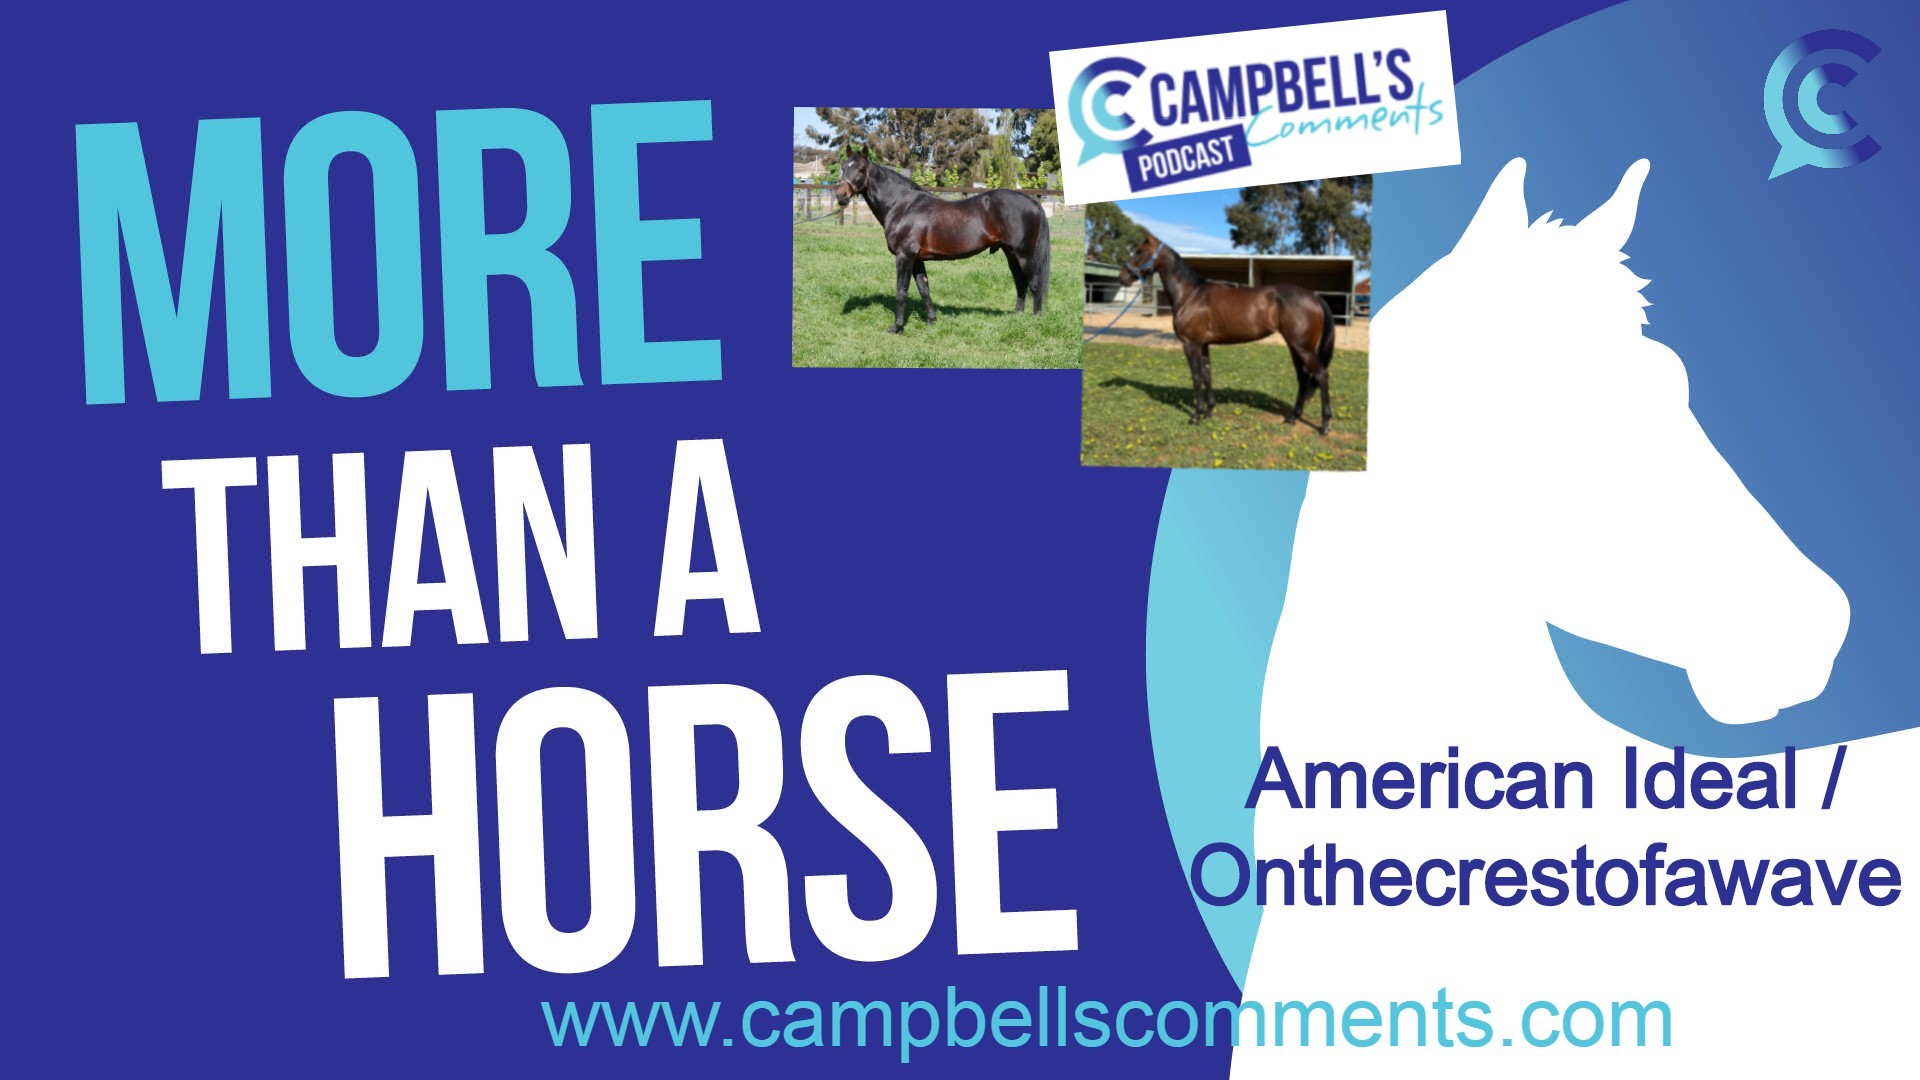 You are currently viewing 56: More Than A Horse – Onthecrestofawave/American Ideal with Kath Macintosh